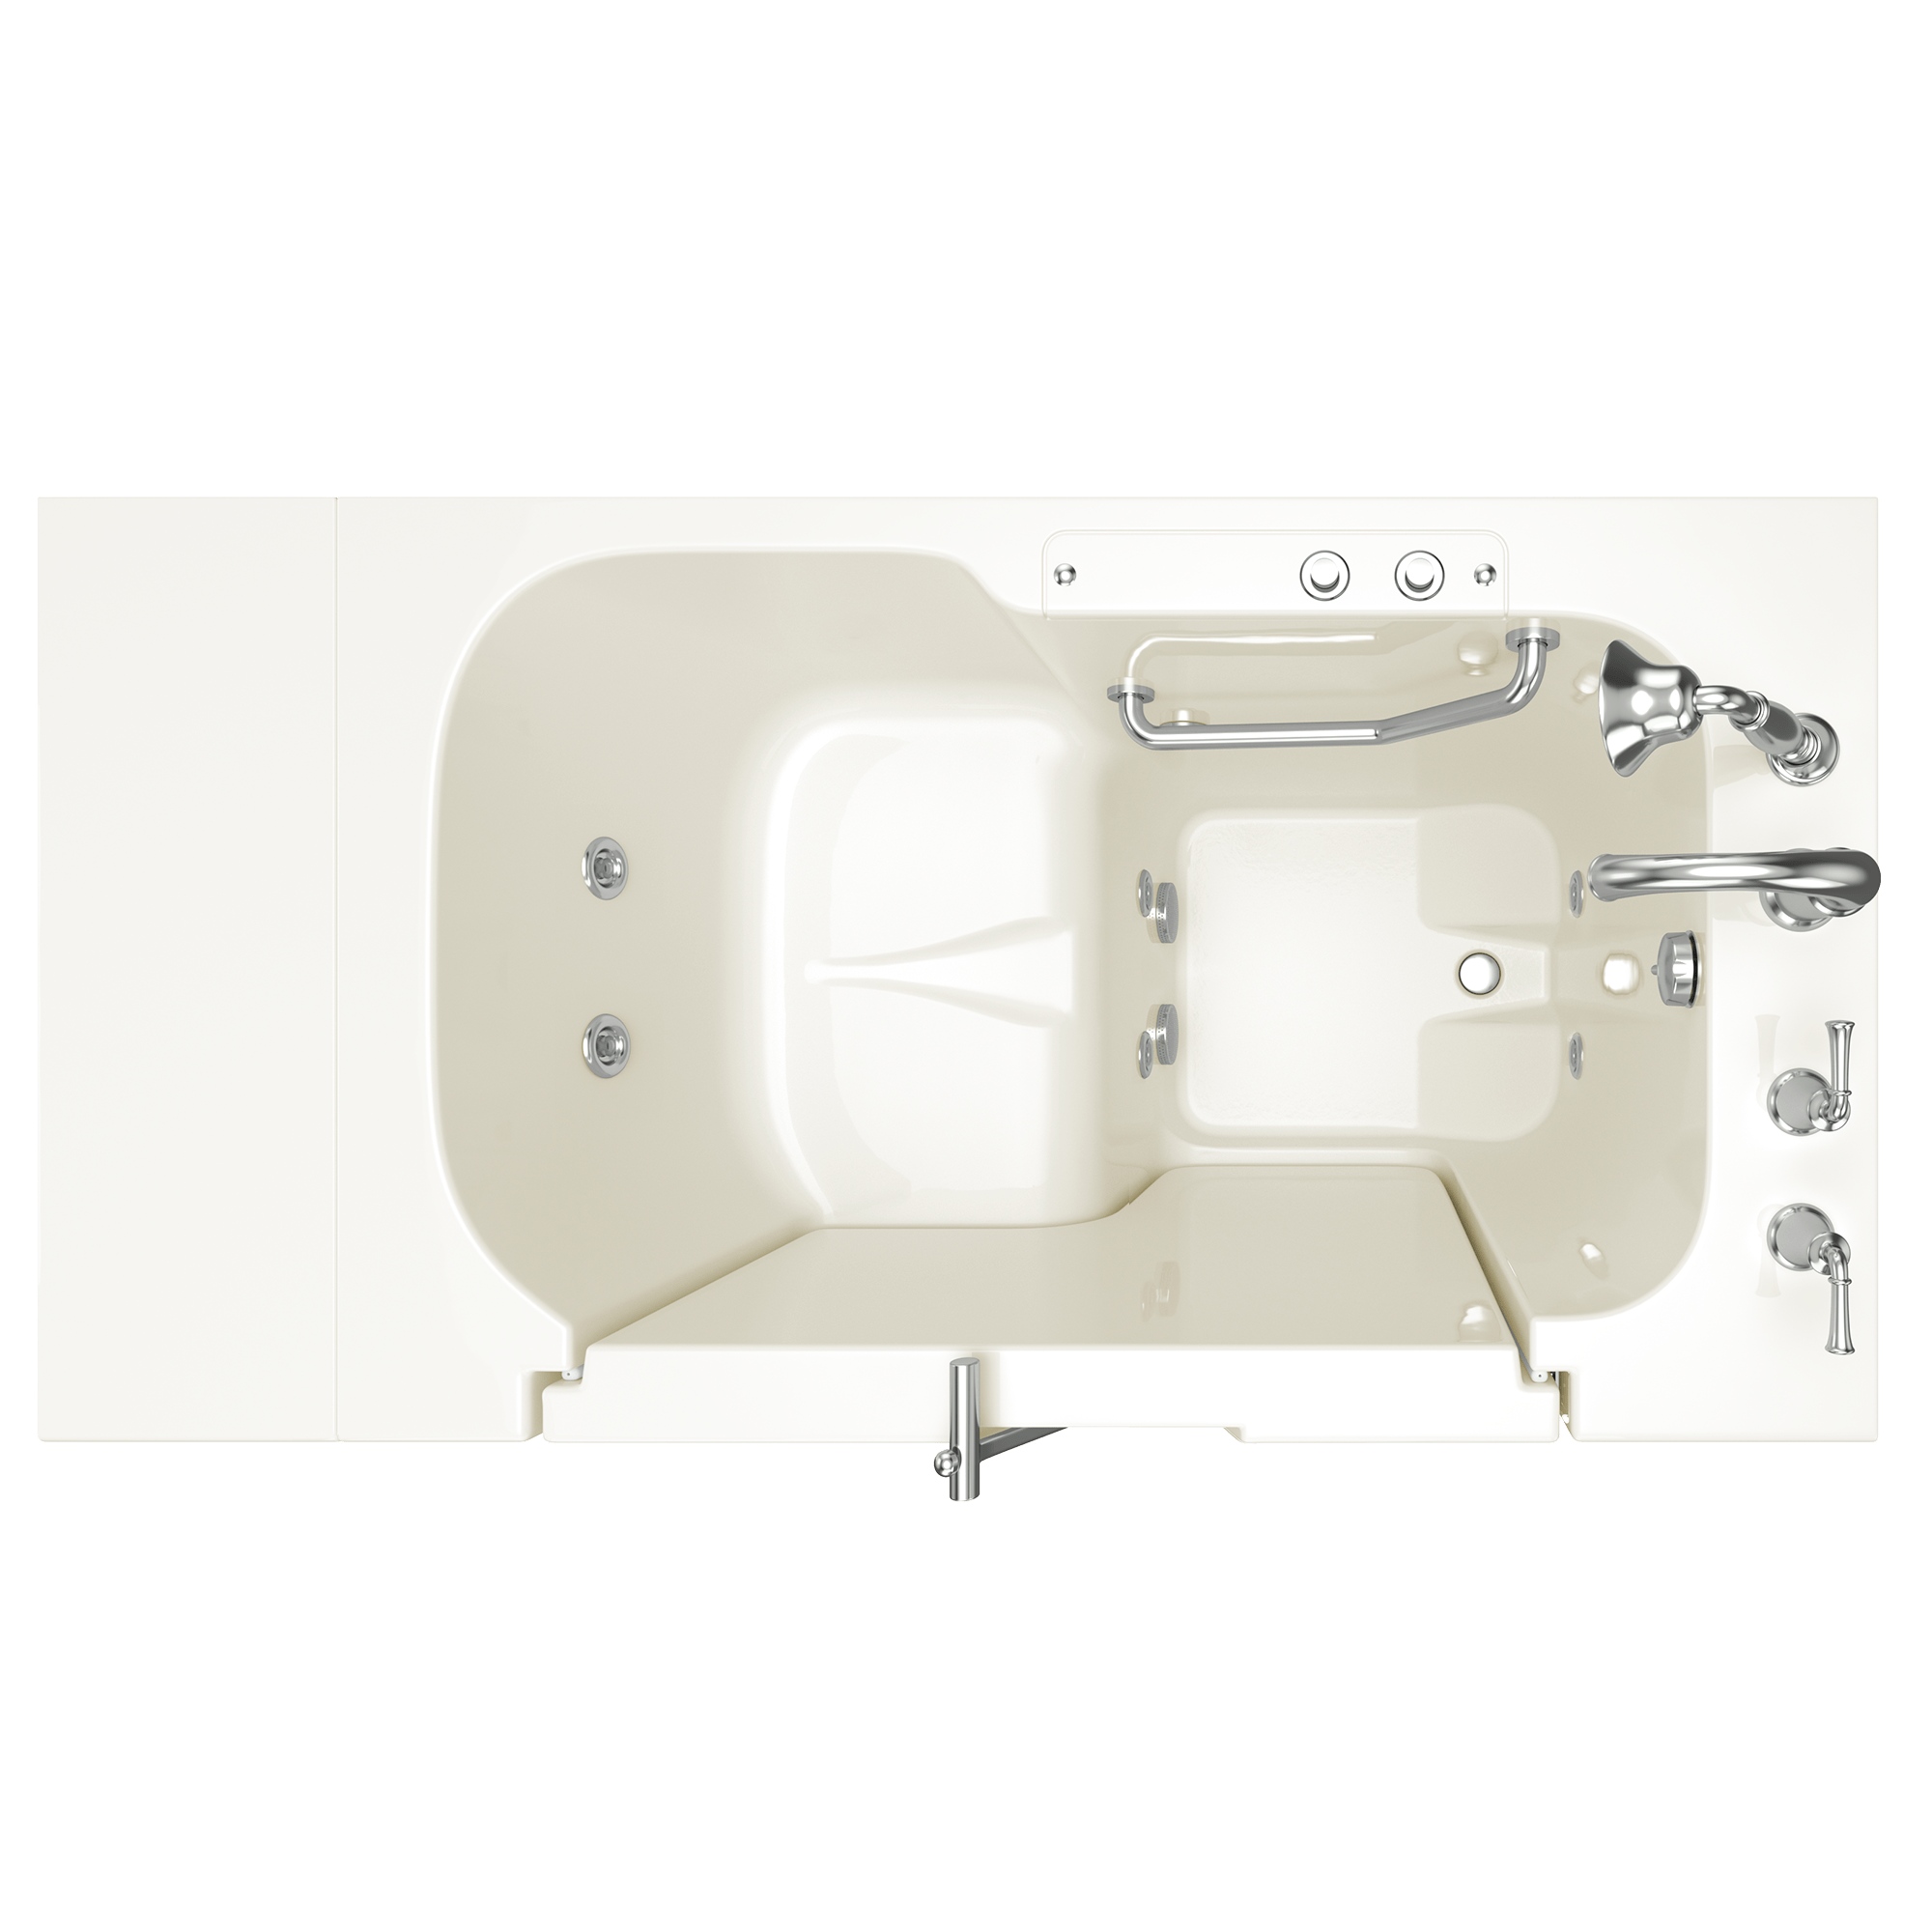 Gelcoat Value Series 32 x 52  Inch Walk in Tub With Whirlpool System   Right Hand Drain With Faucet WIB LINEN